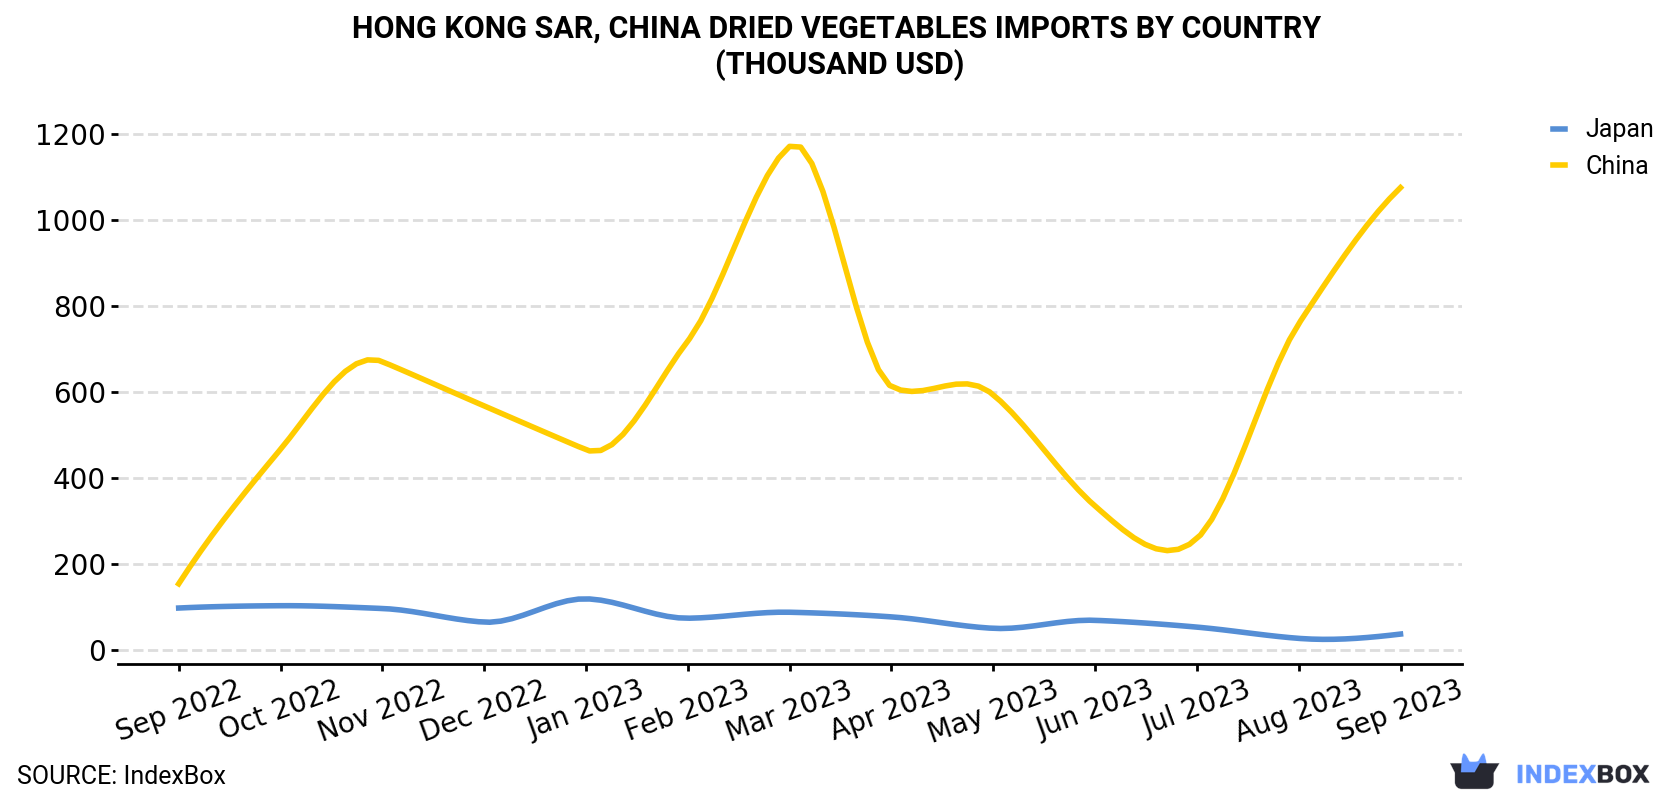 Hong Kong Dried Vegetables Imports By Country (Thousand USD)